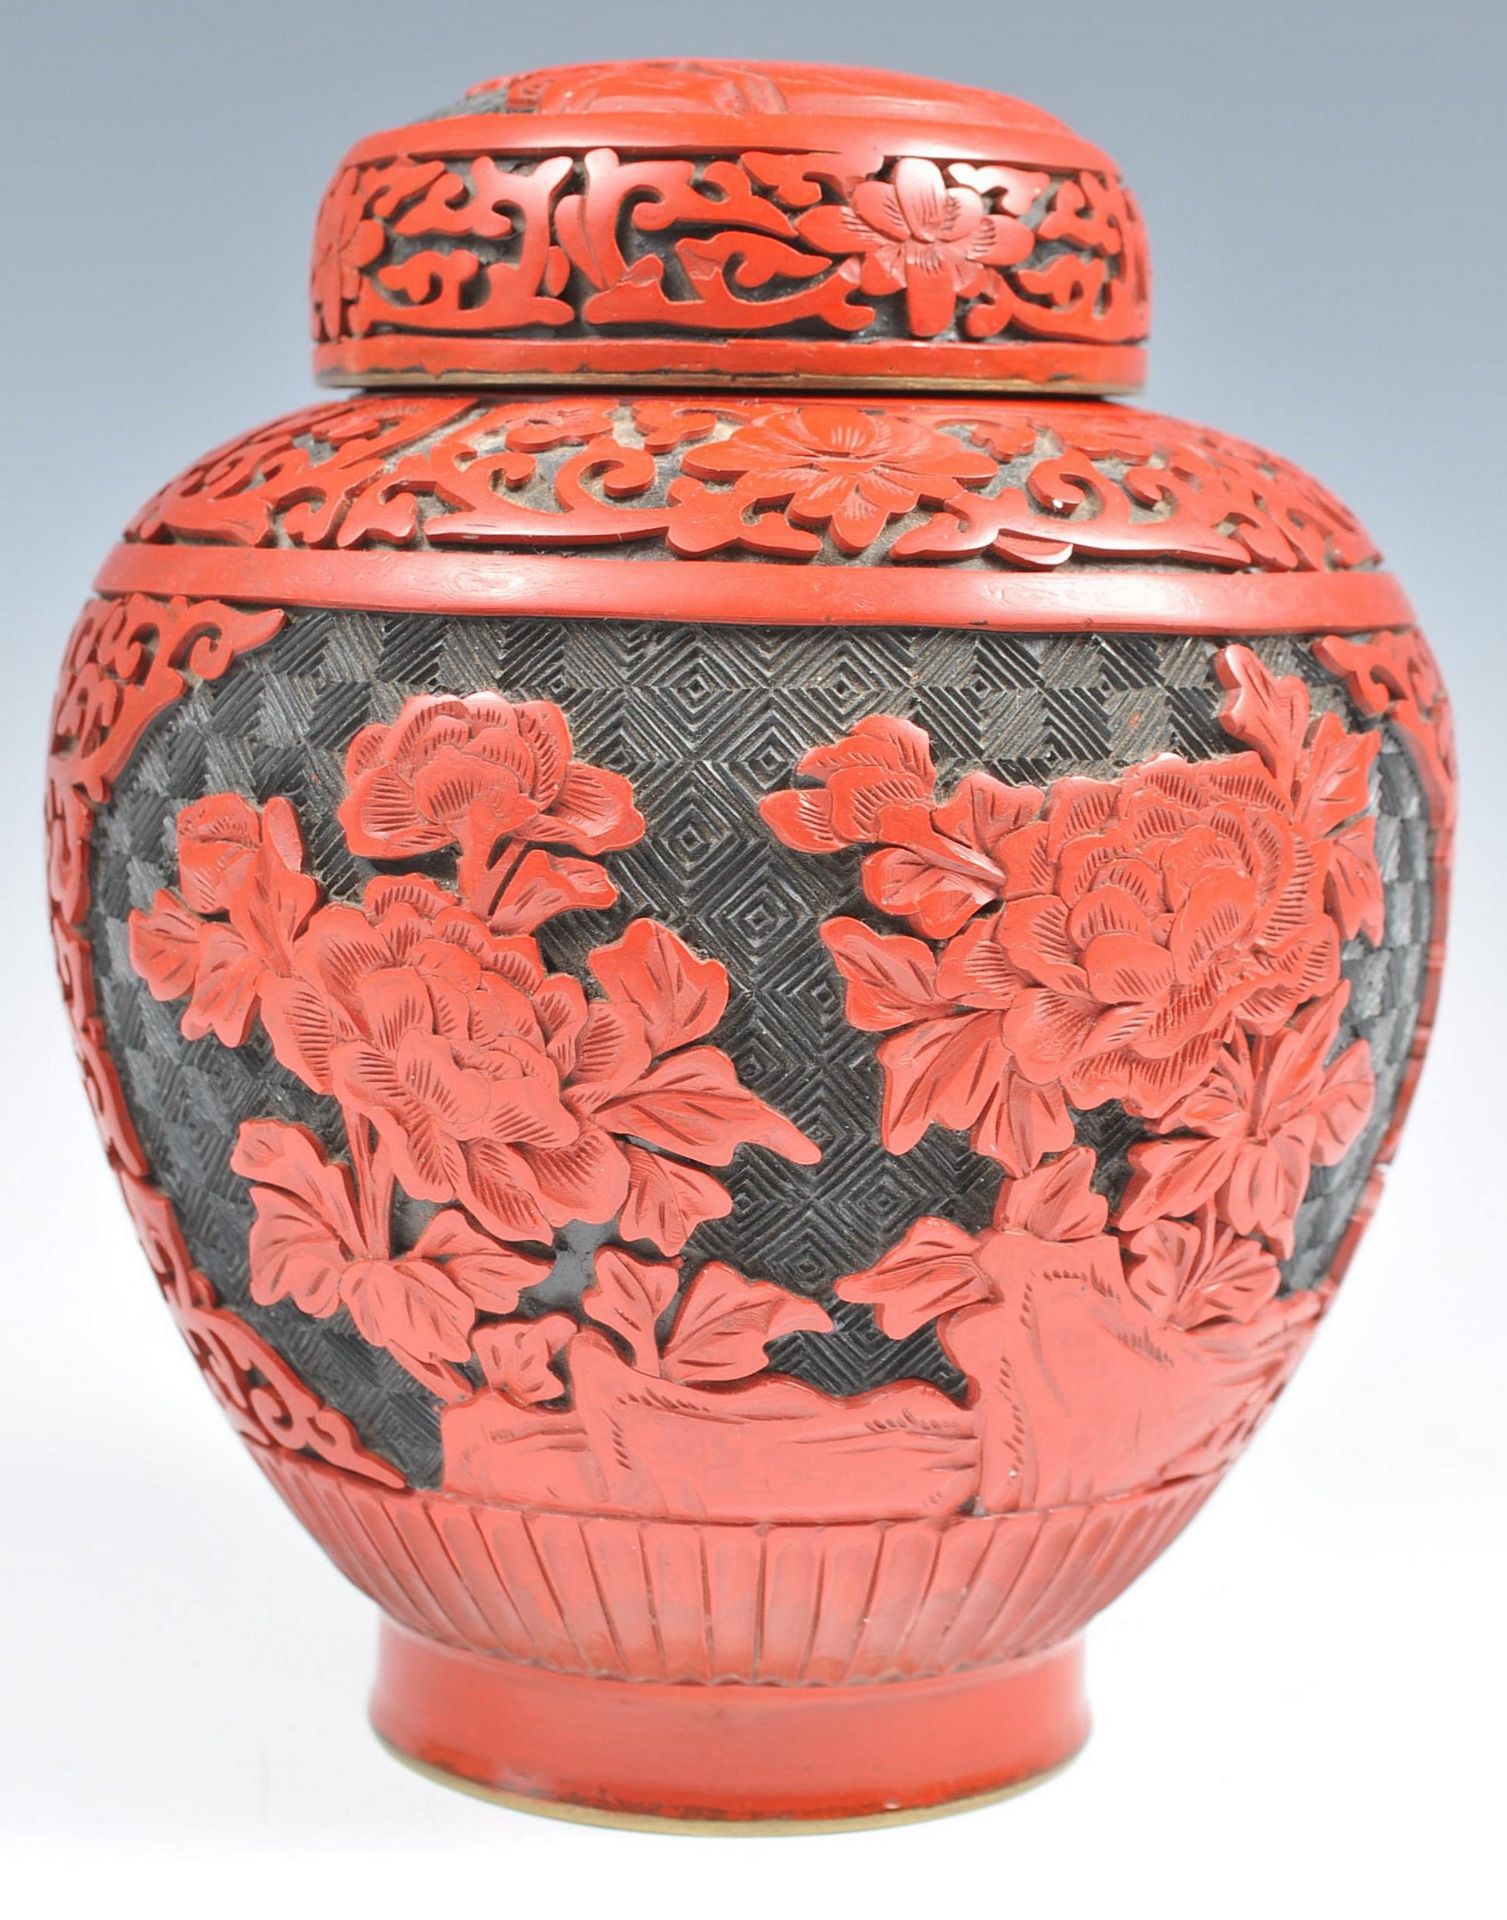 19TH CENTURY CHINESE CINNABAR LACQUER GINGER JAR AND COVER.